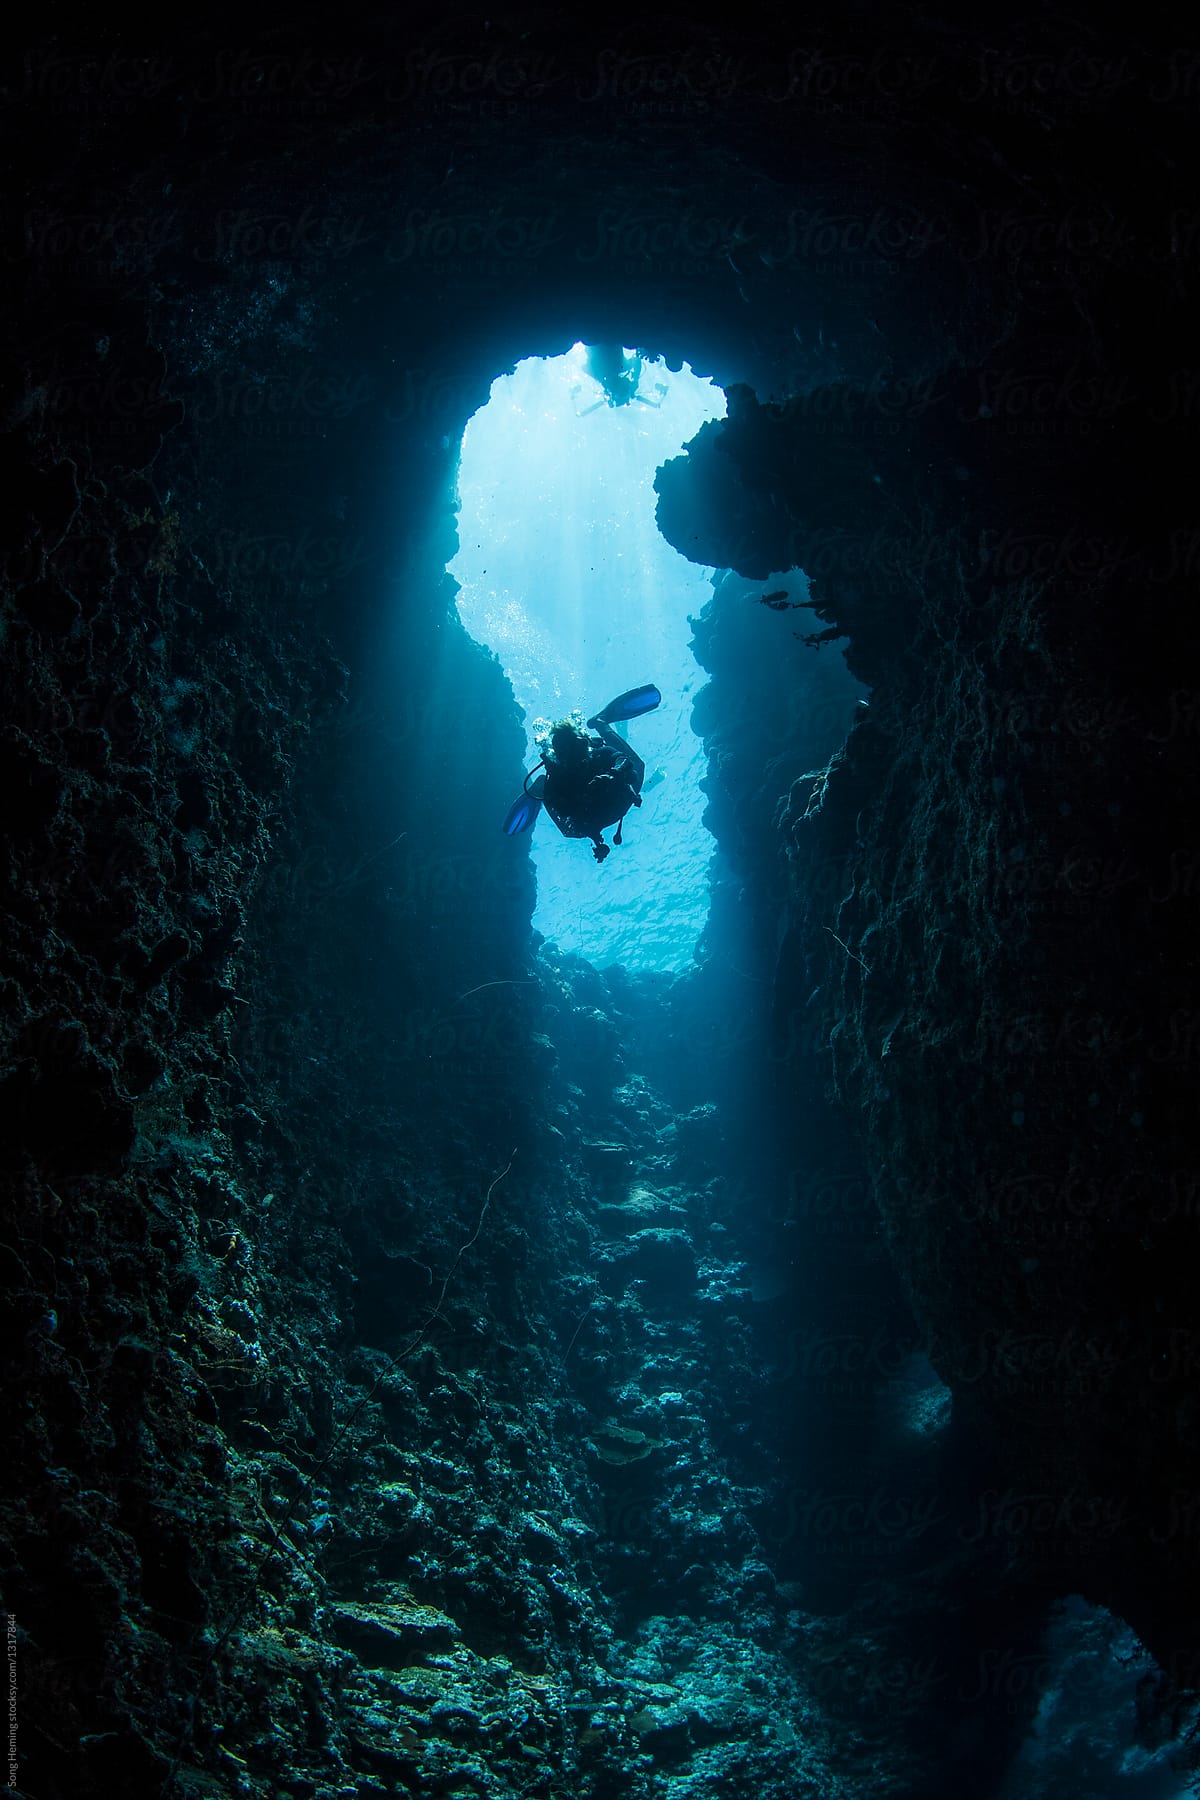 Scuba diver diving down to the blue hole